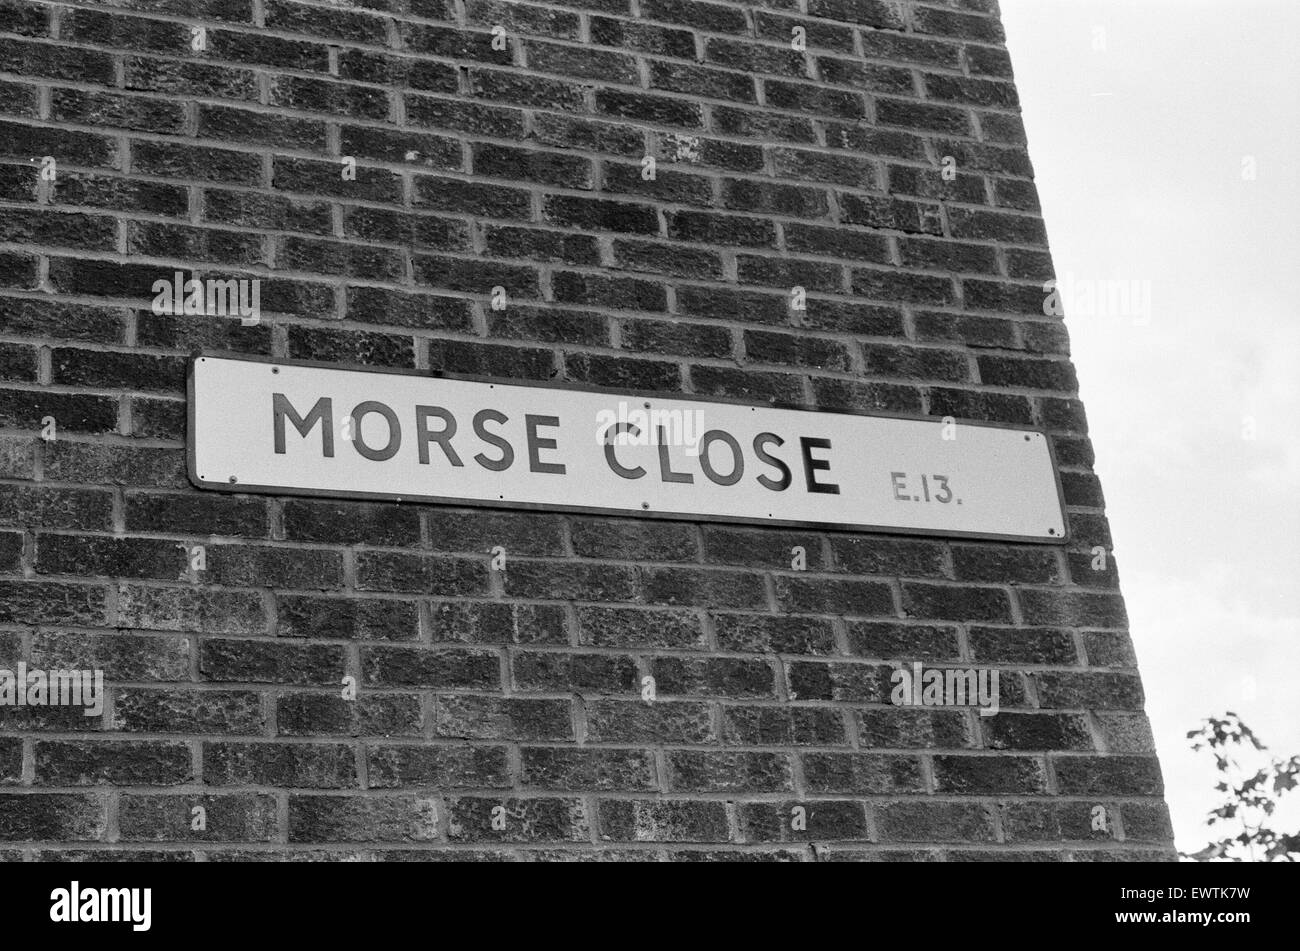 Wanted Man, Henry McKenny, was picked up by armed Police at Morse Close, Plaistow, London, late last night (20th). Pictures taken following day, 21st September 1979. Street Sign. Stock Photo